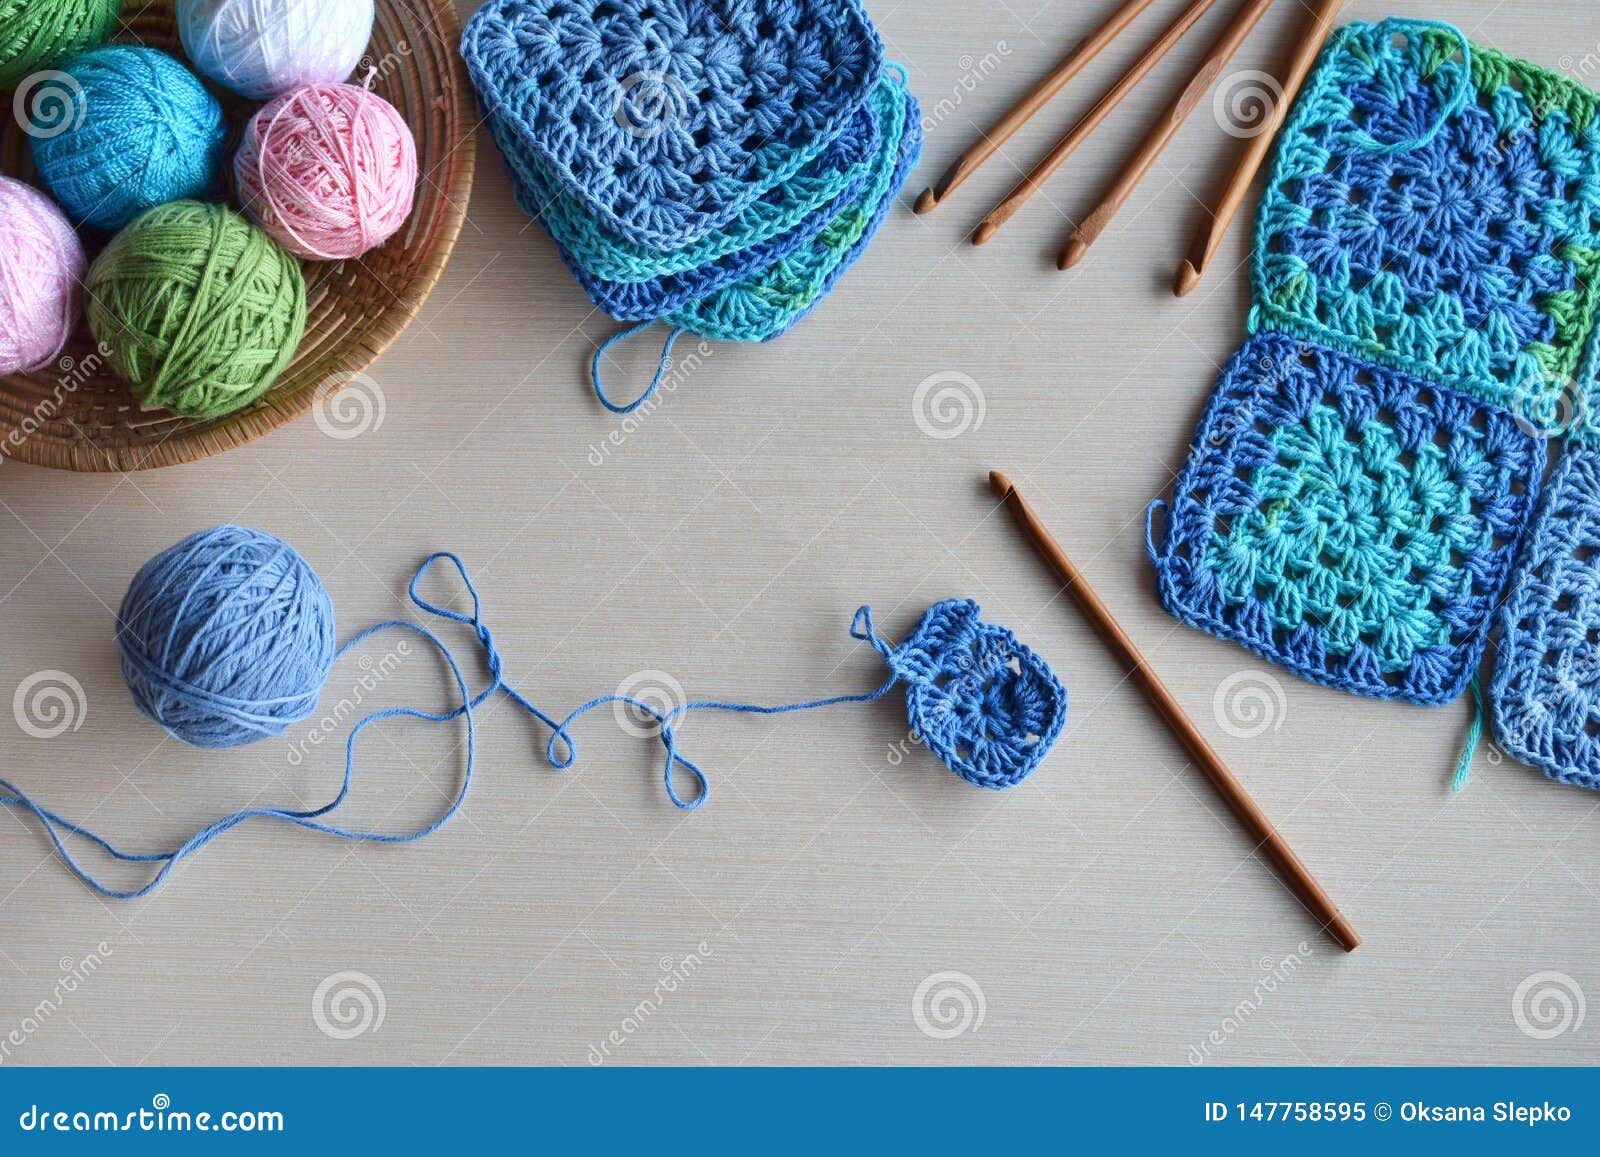 What to knit with cotton yarn